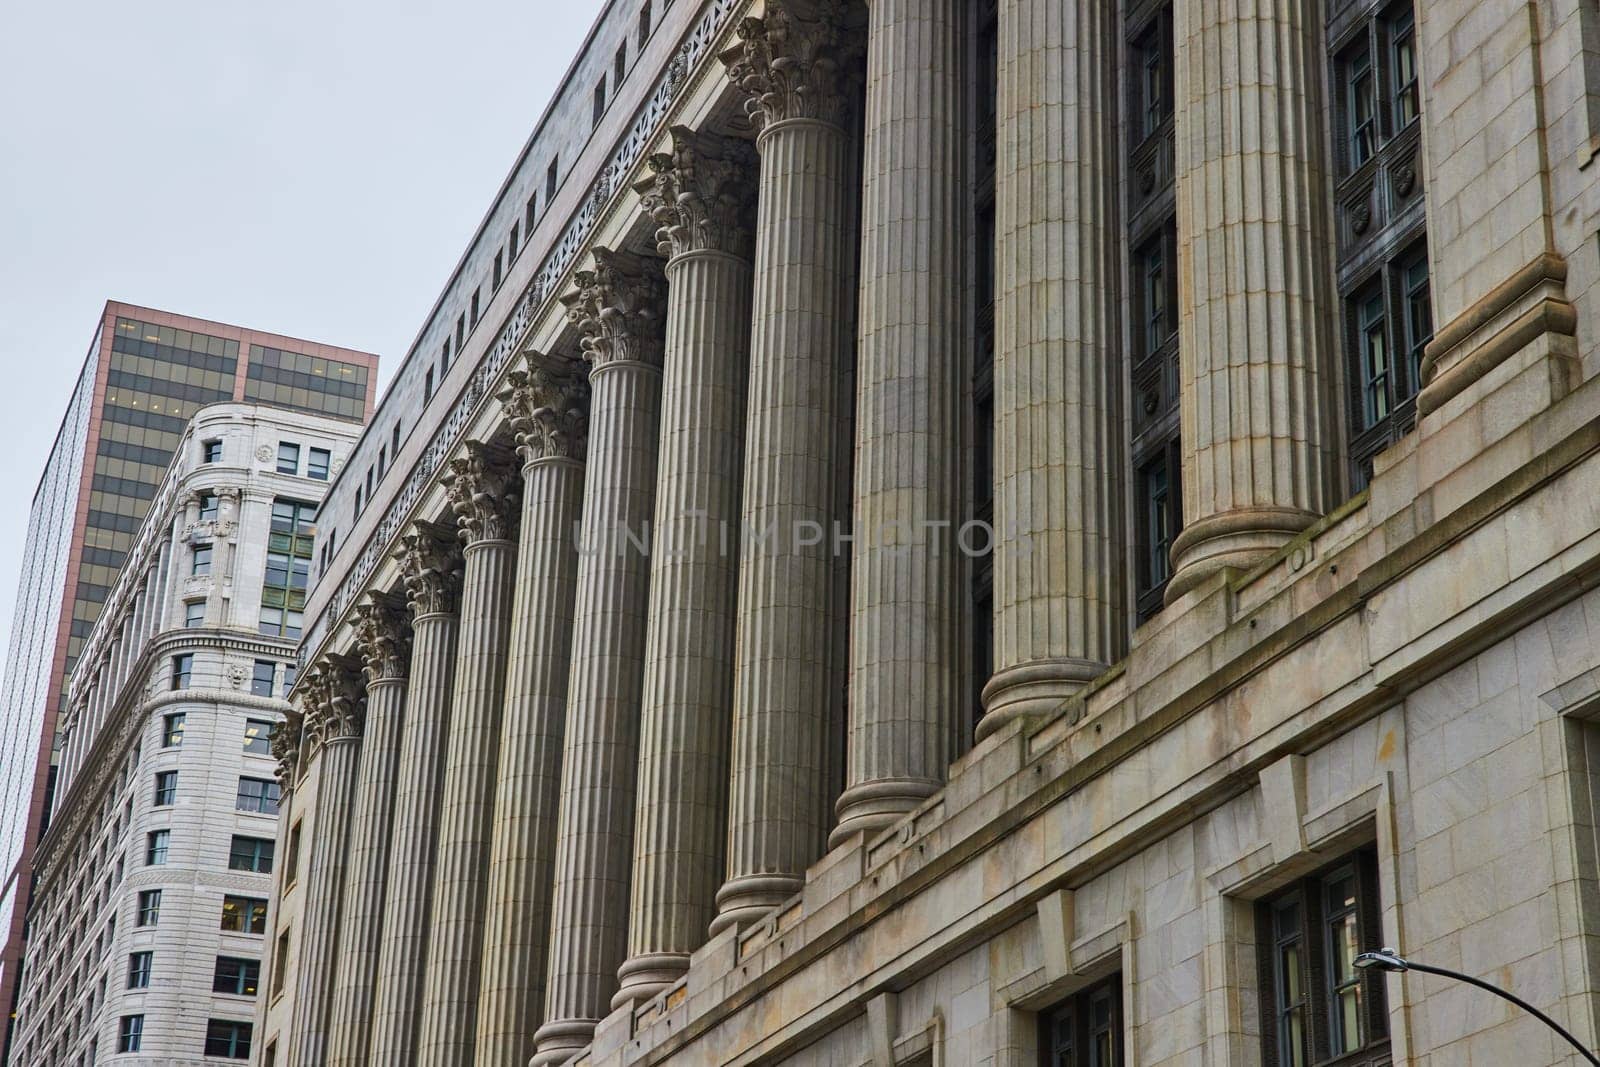 Grey building with pillars and columns on overcast day with gloomy, ominous sky, Chicago, IL by njproductions